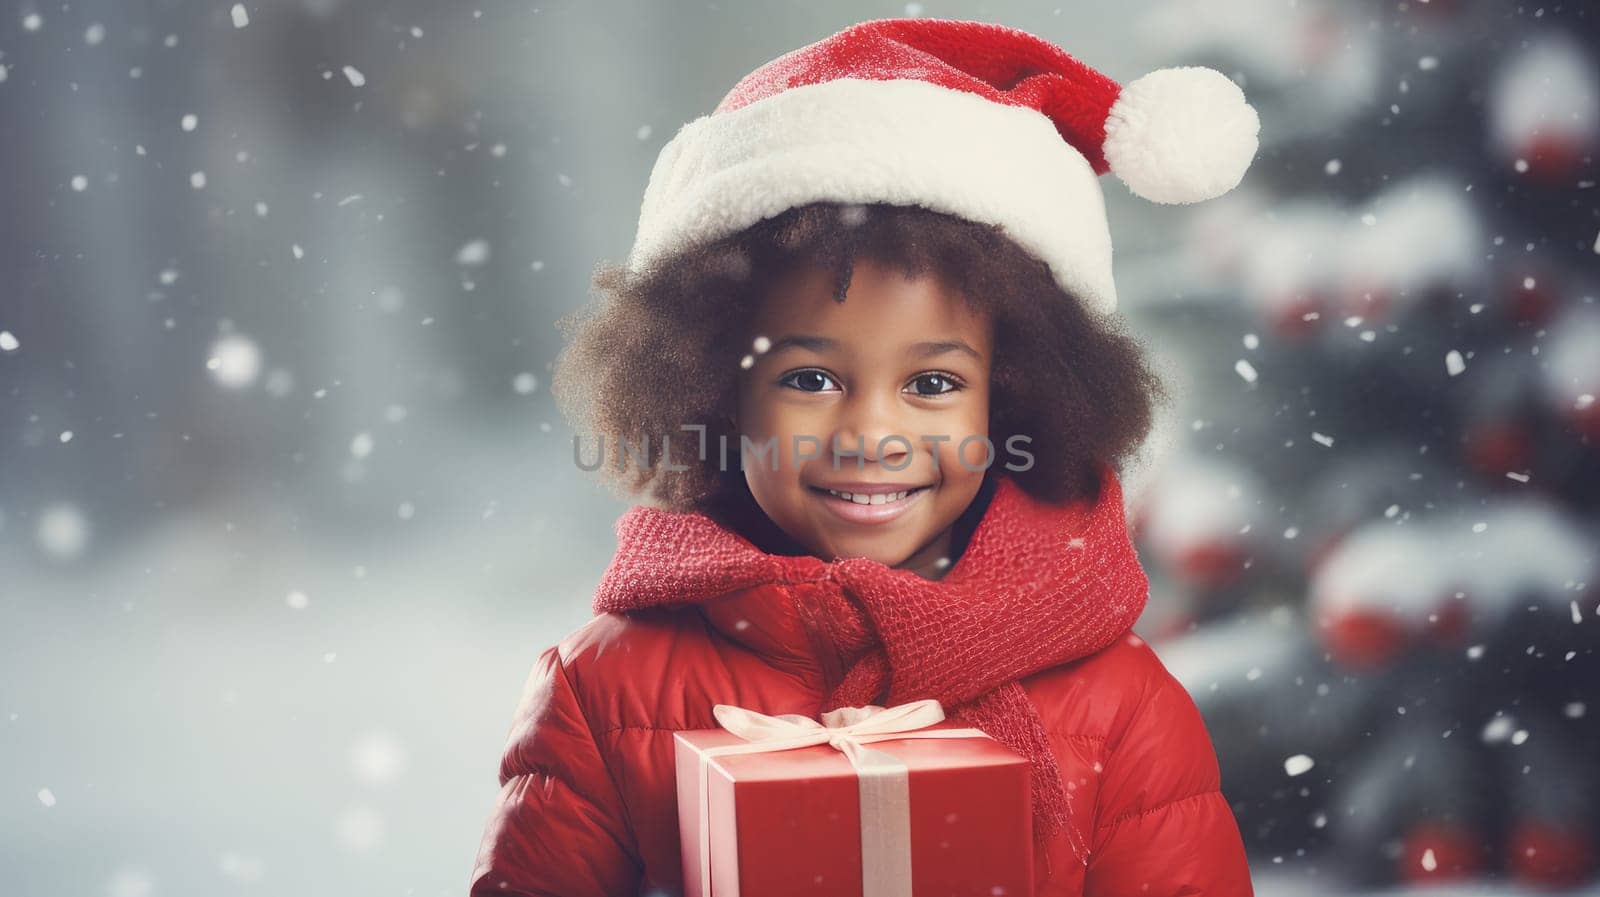 Pretty smiling African American girl, child in red jacket and hat holding Christmas gifts while standing against background of decorated Christmas tree outdoors on snowy day of winter holidays.